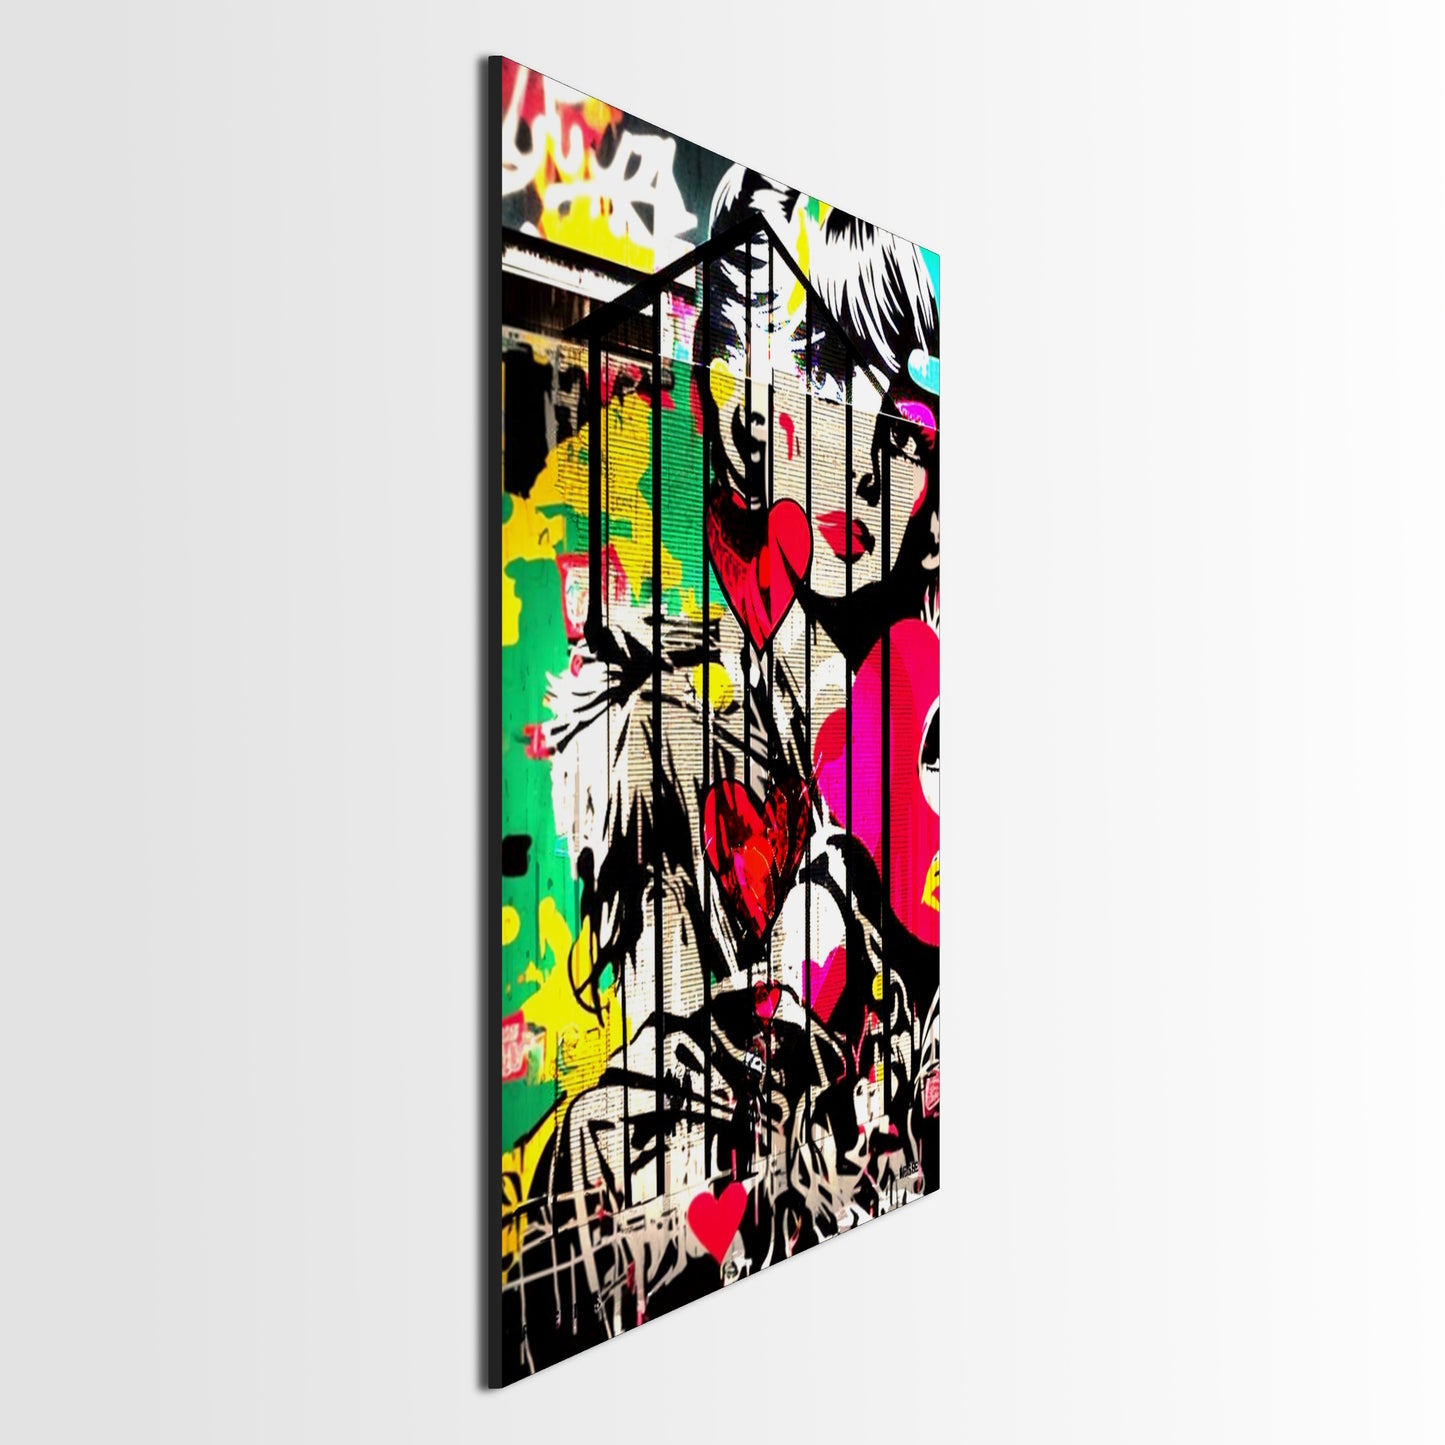 Caged Beauty Pop Art Painting of a Woman on Graffiti-Covered Building